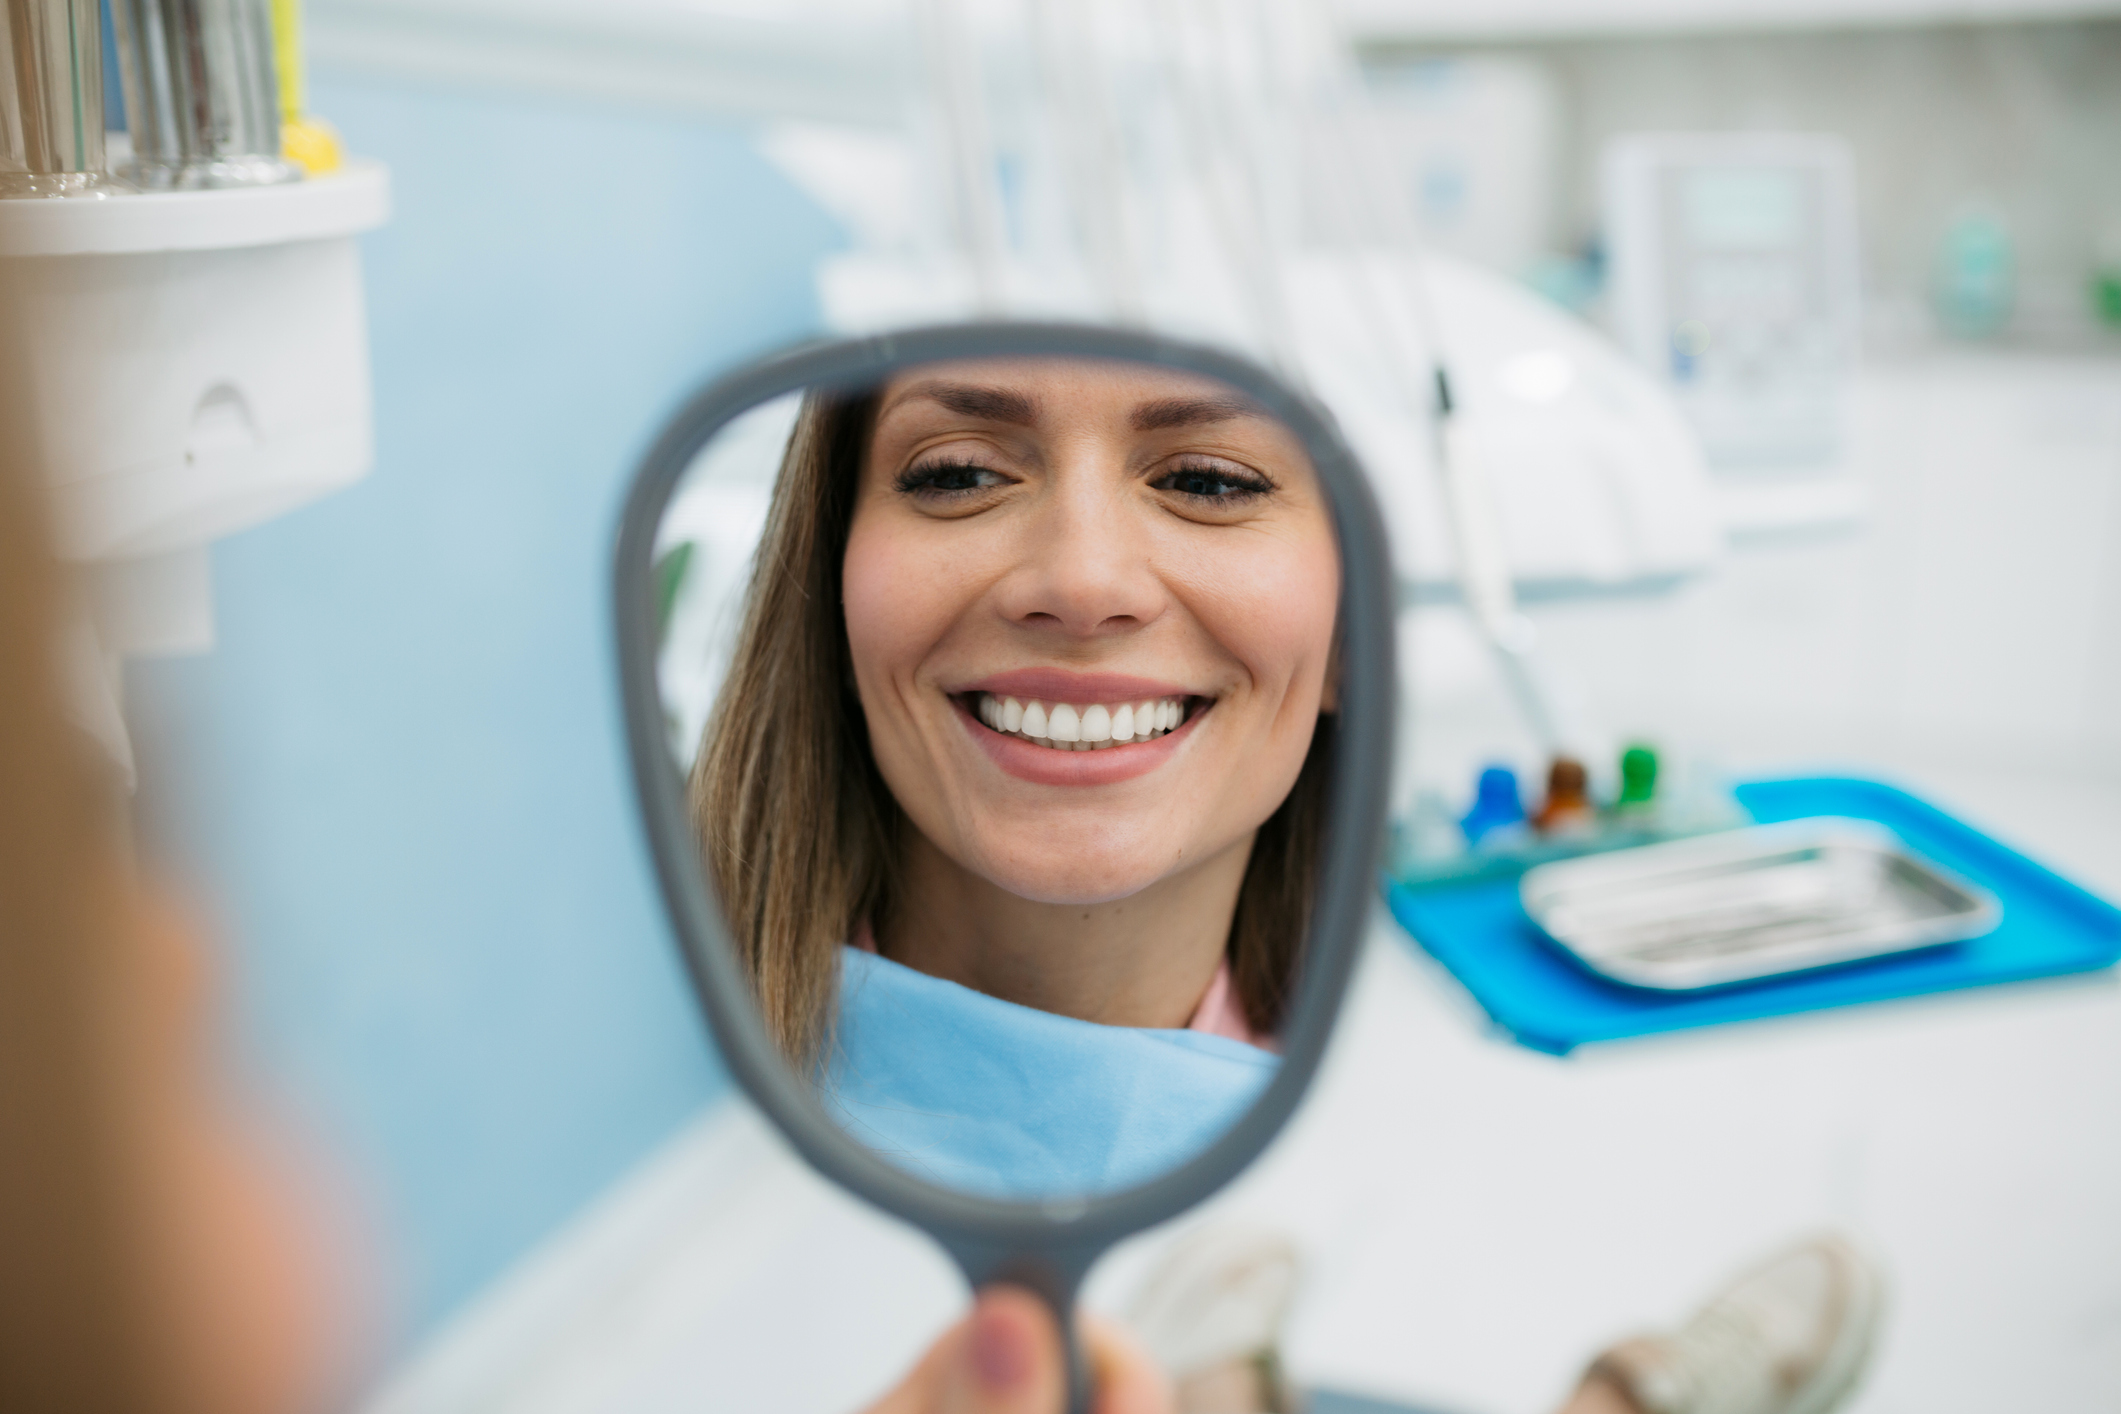 Young adult happy female patient relaxing while visiting a dentist office, holding a vanity mirror and with a toothy smile on her face inspecting her teeth